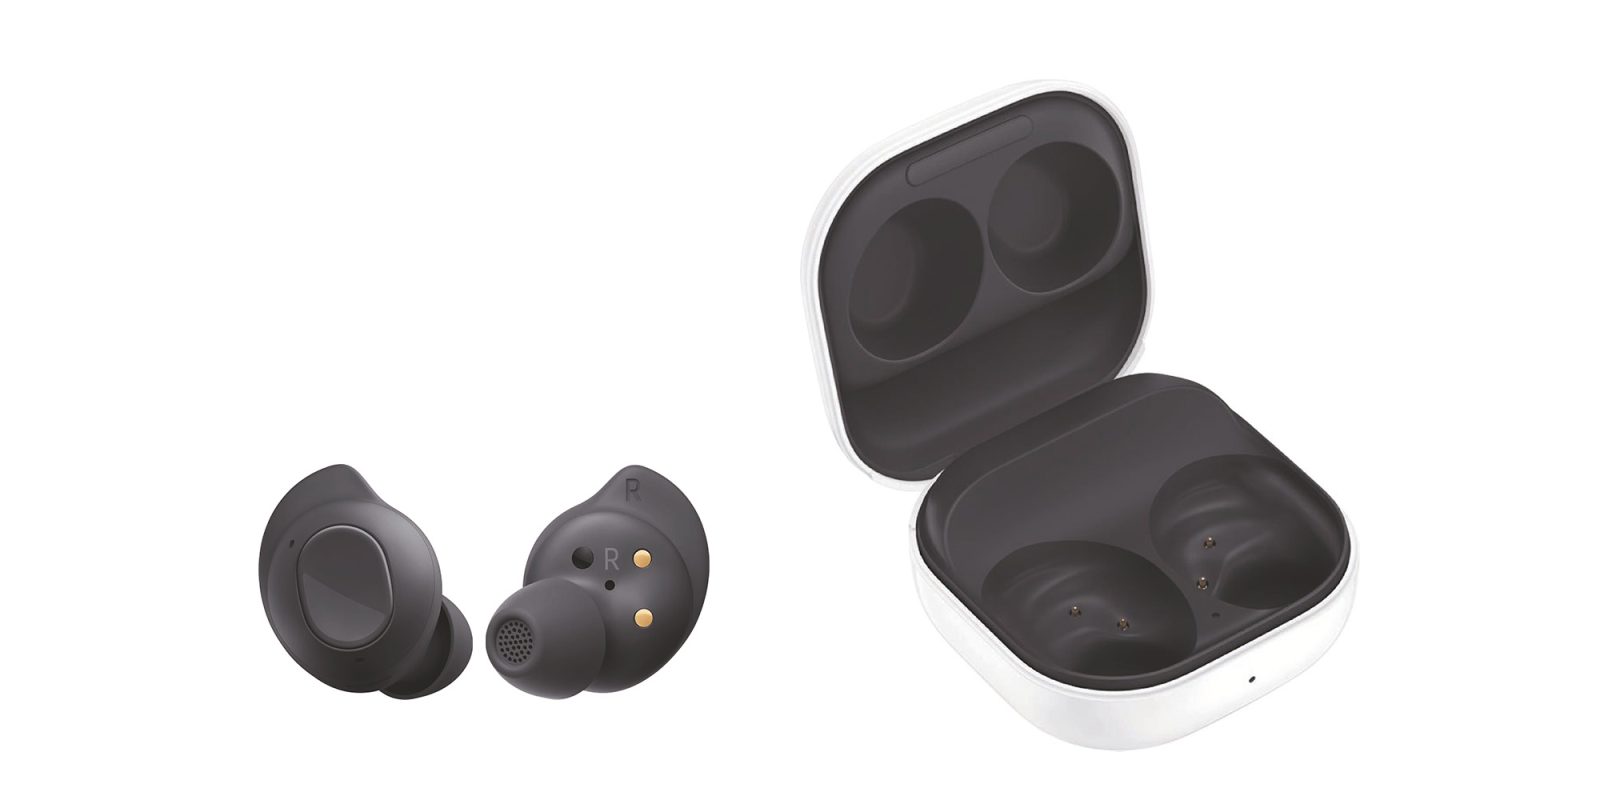 Galaxy Buds FE will reportedly match Pixel Buds A-Series on price despite having ANC